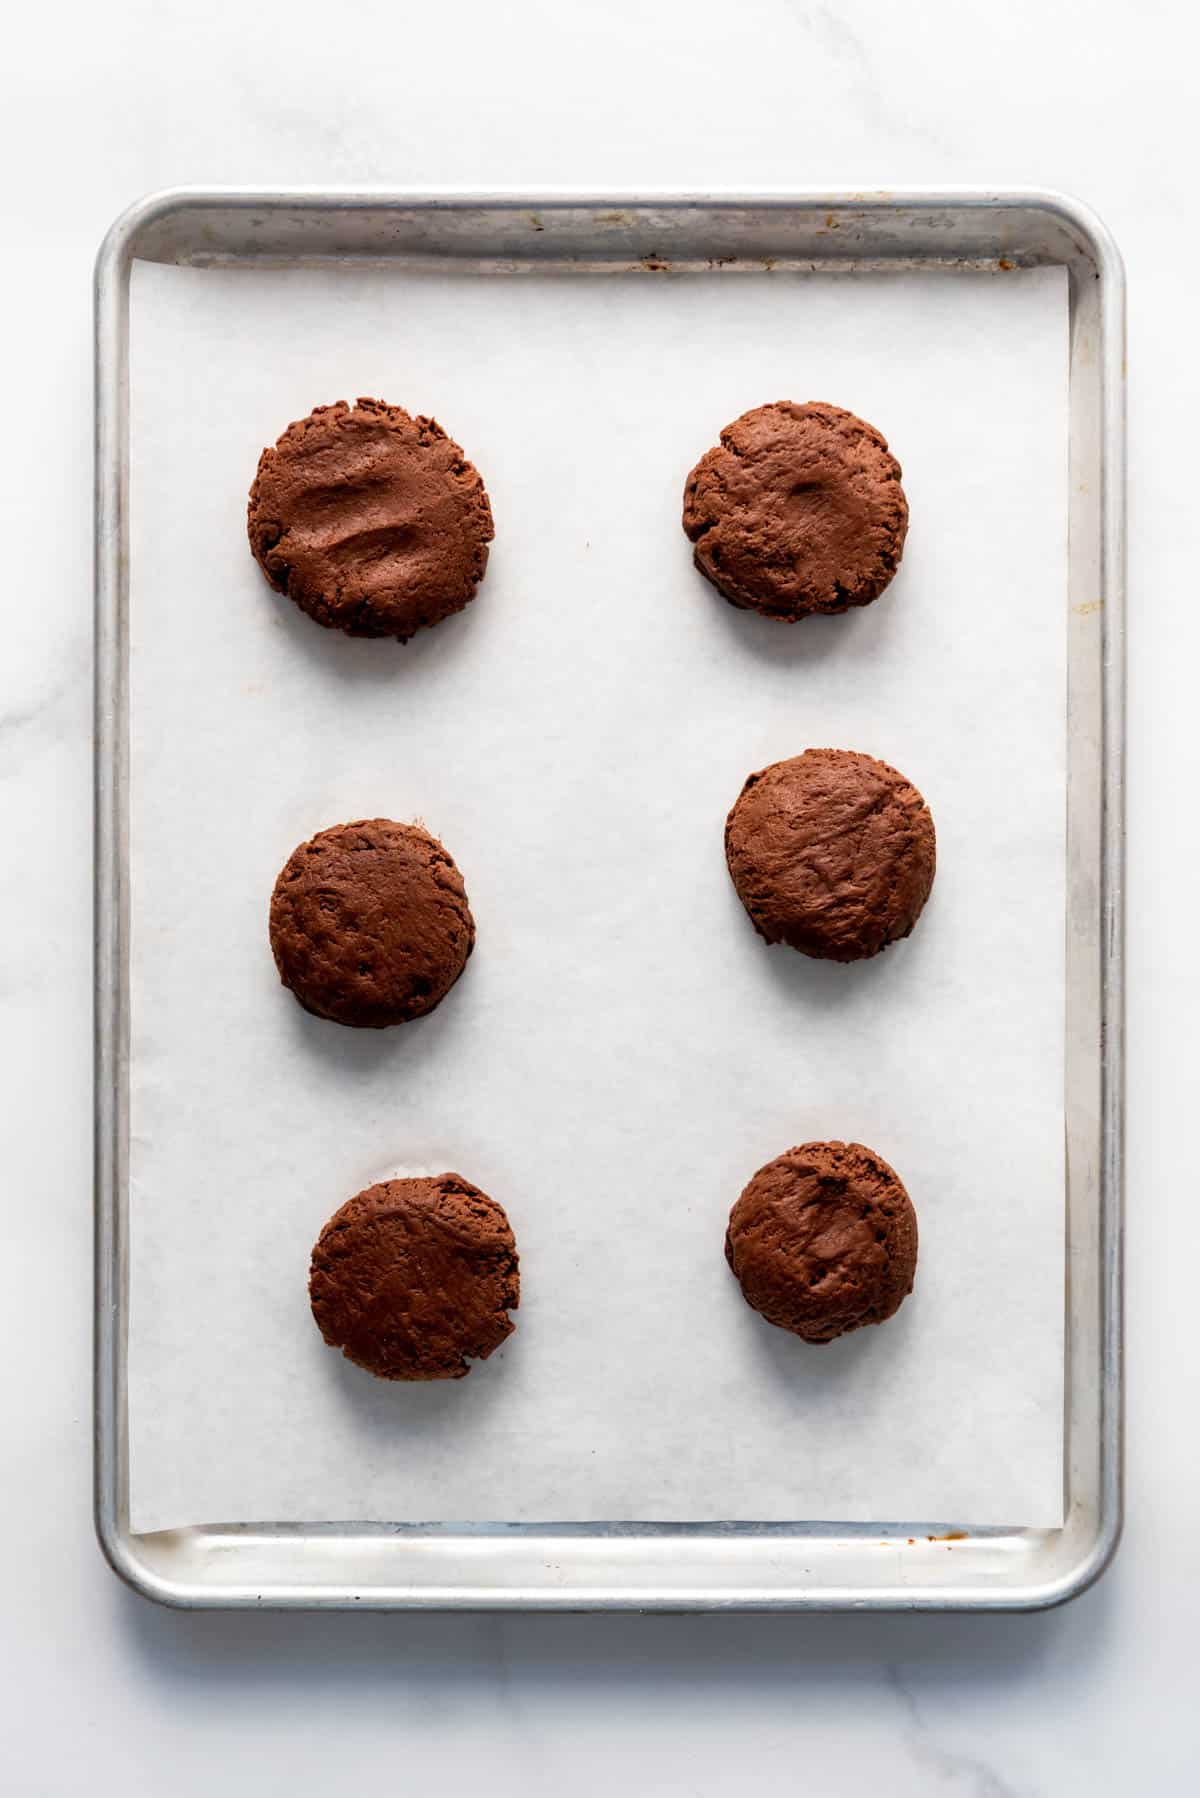 Balls of chocolate cookie dough that have been flattened slightly into pucks before baking.